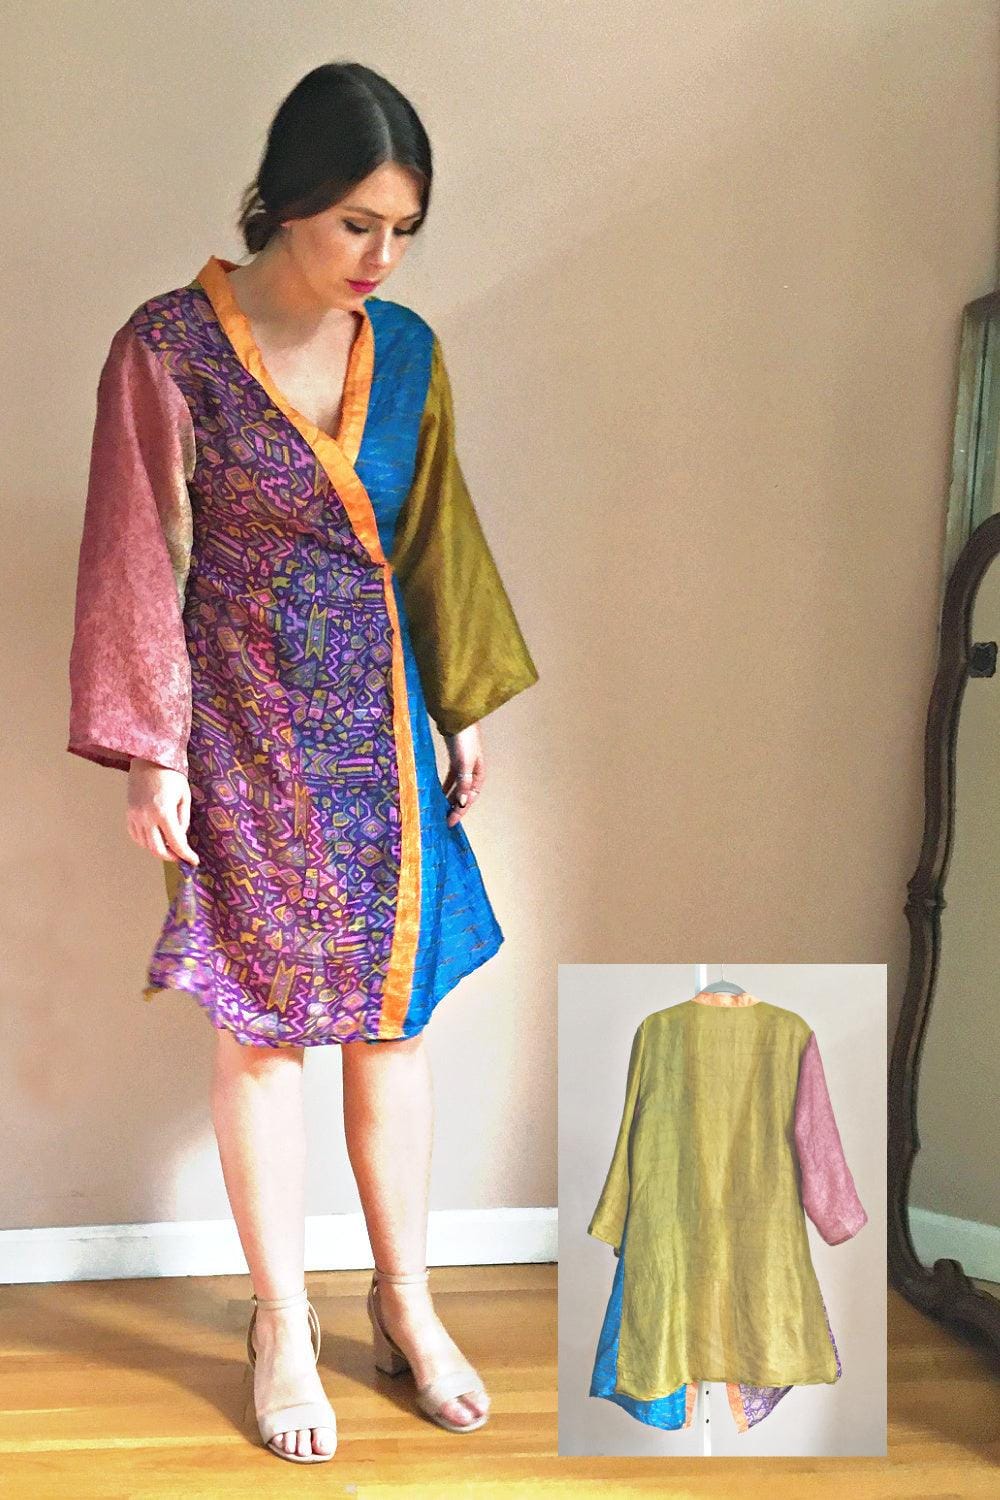 Silk Patchwork kimono worn as a robe. Multi colors and comes with a belt.